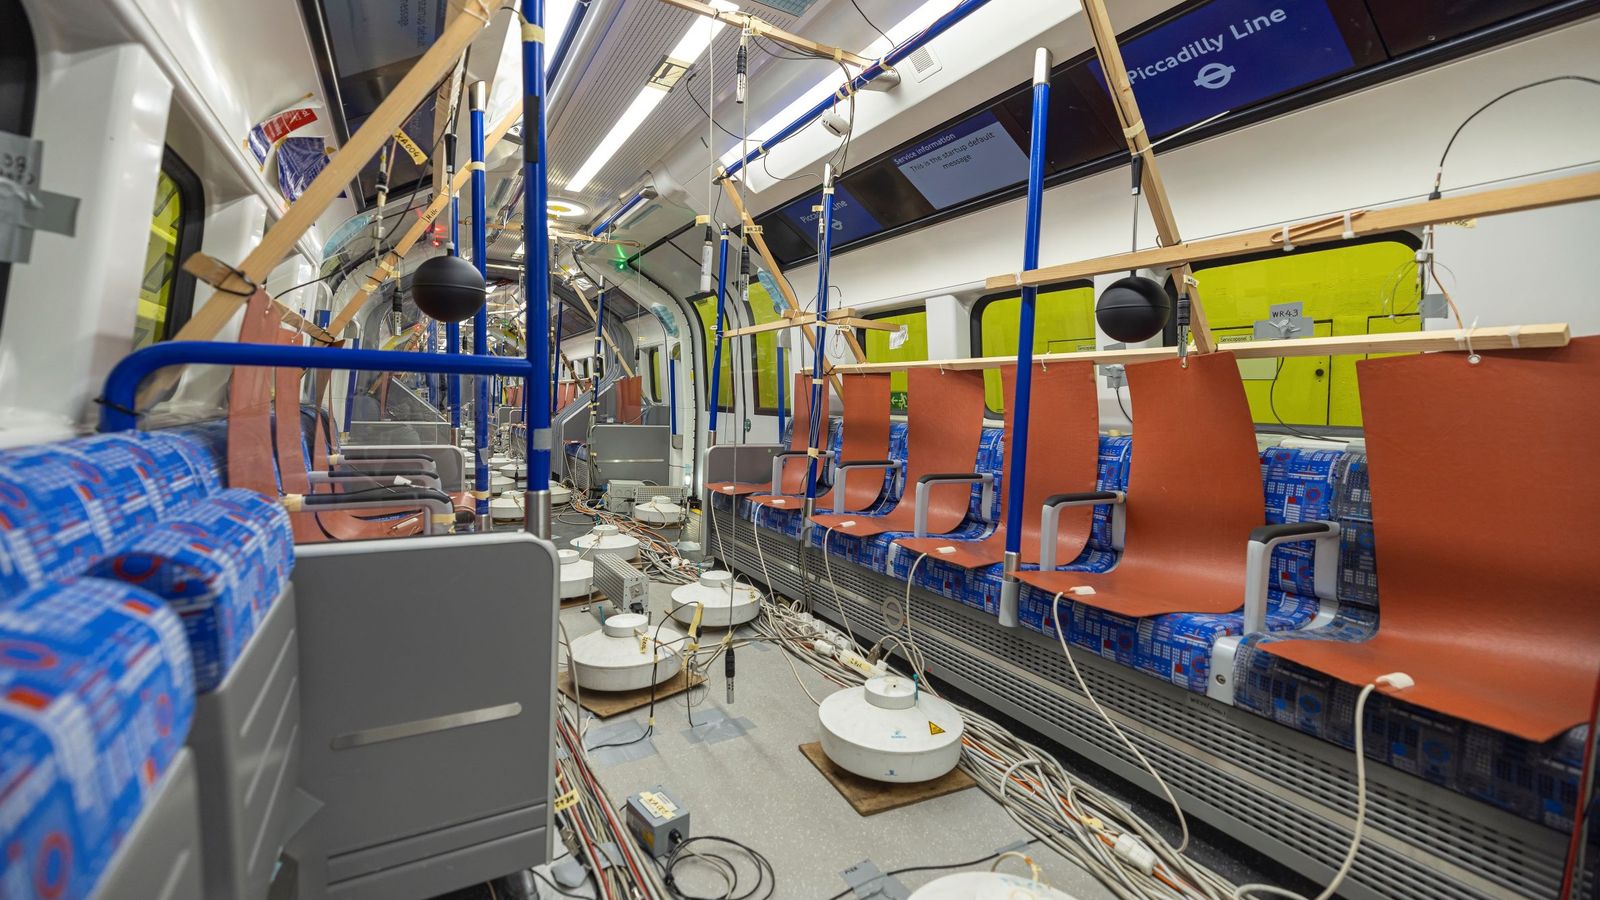 first look inside new air-conditioned tube carriages